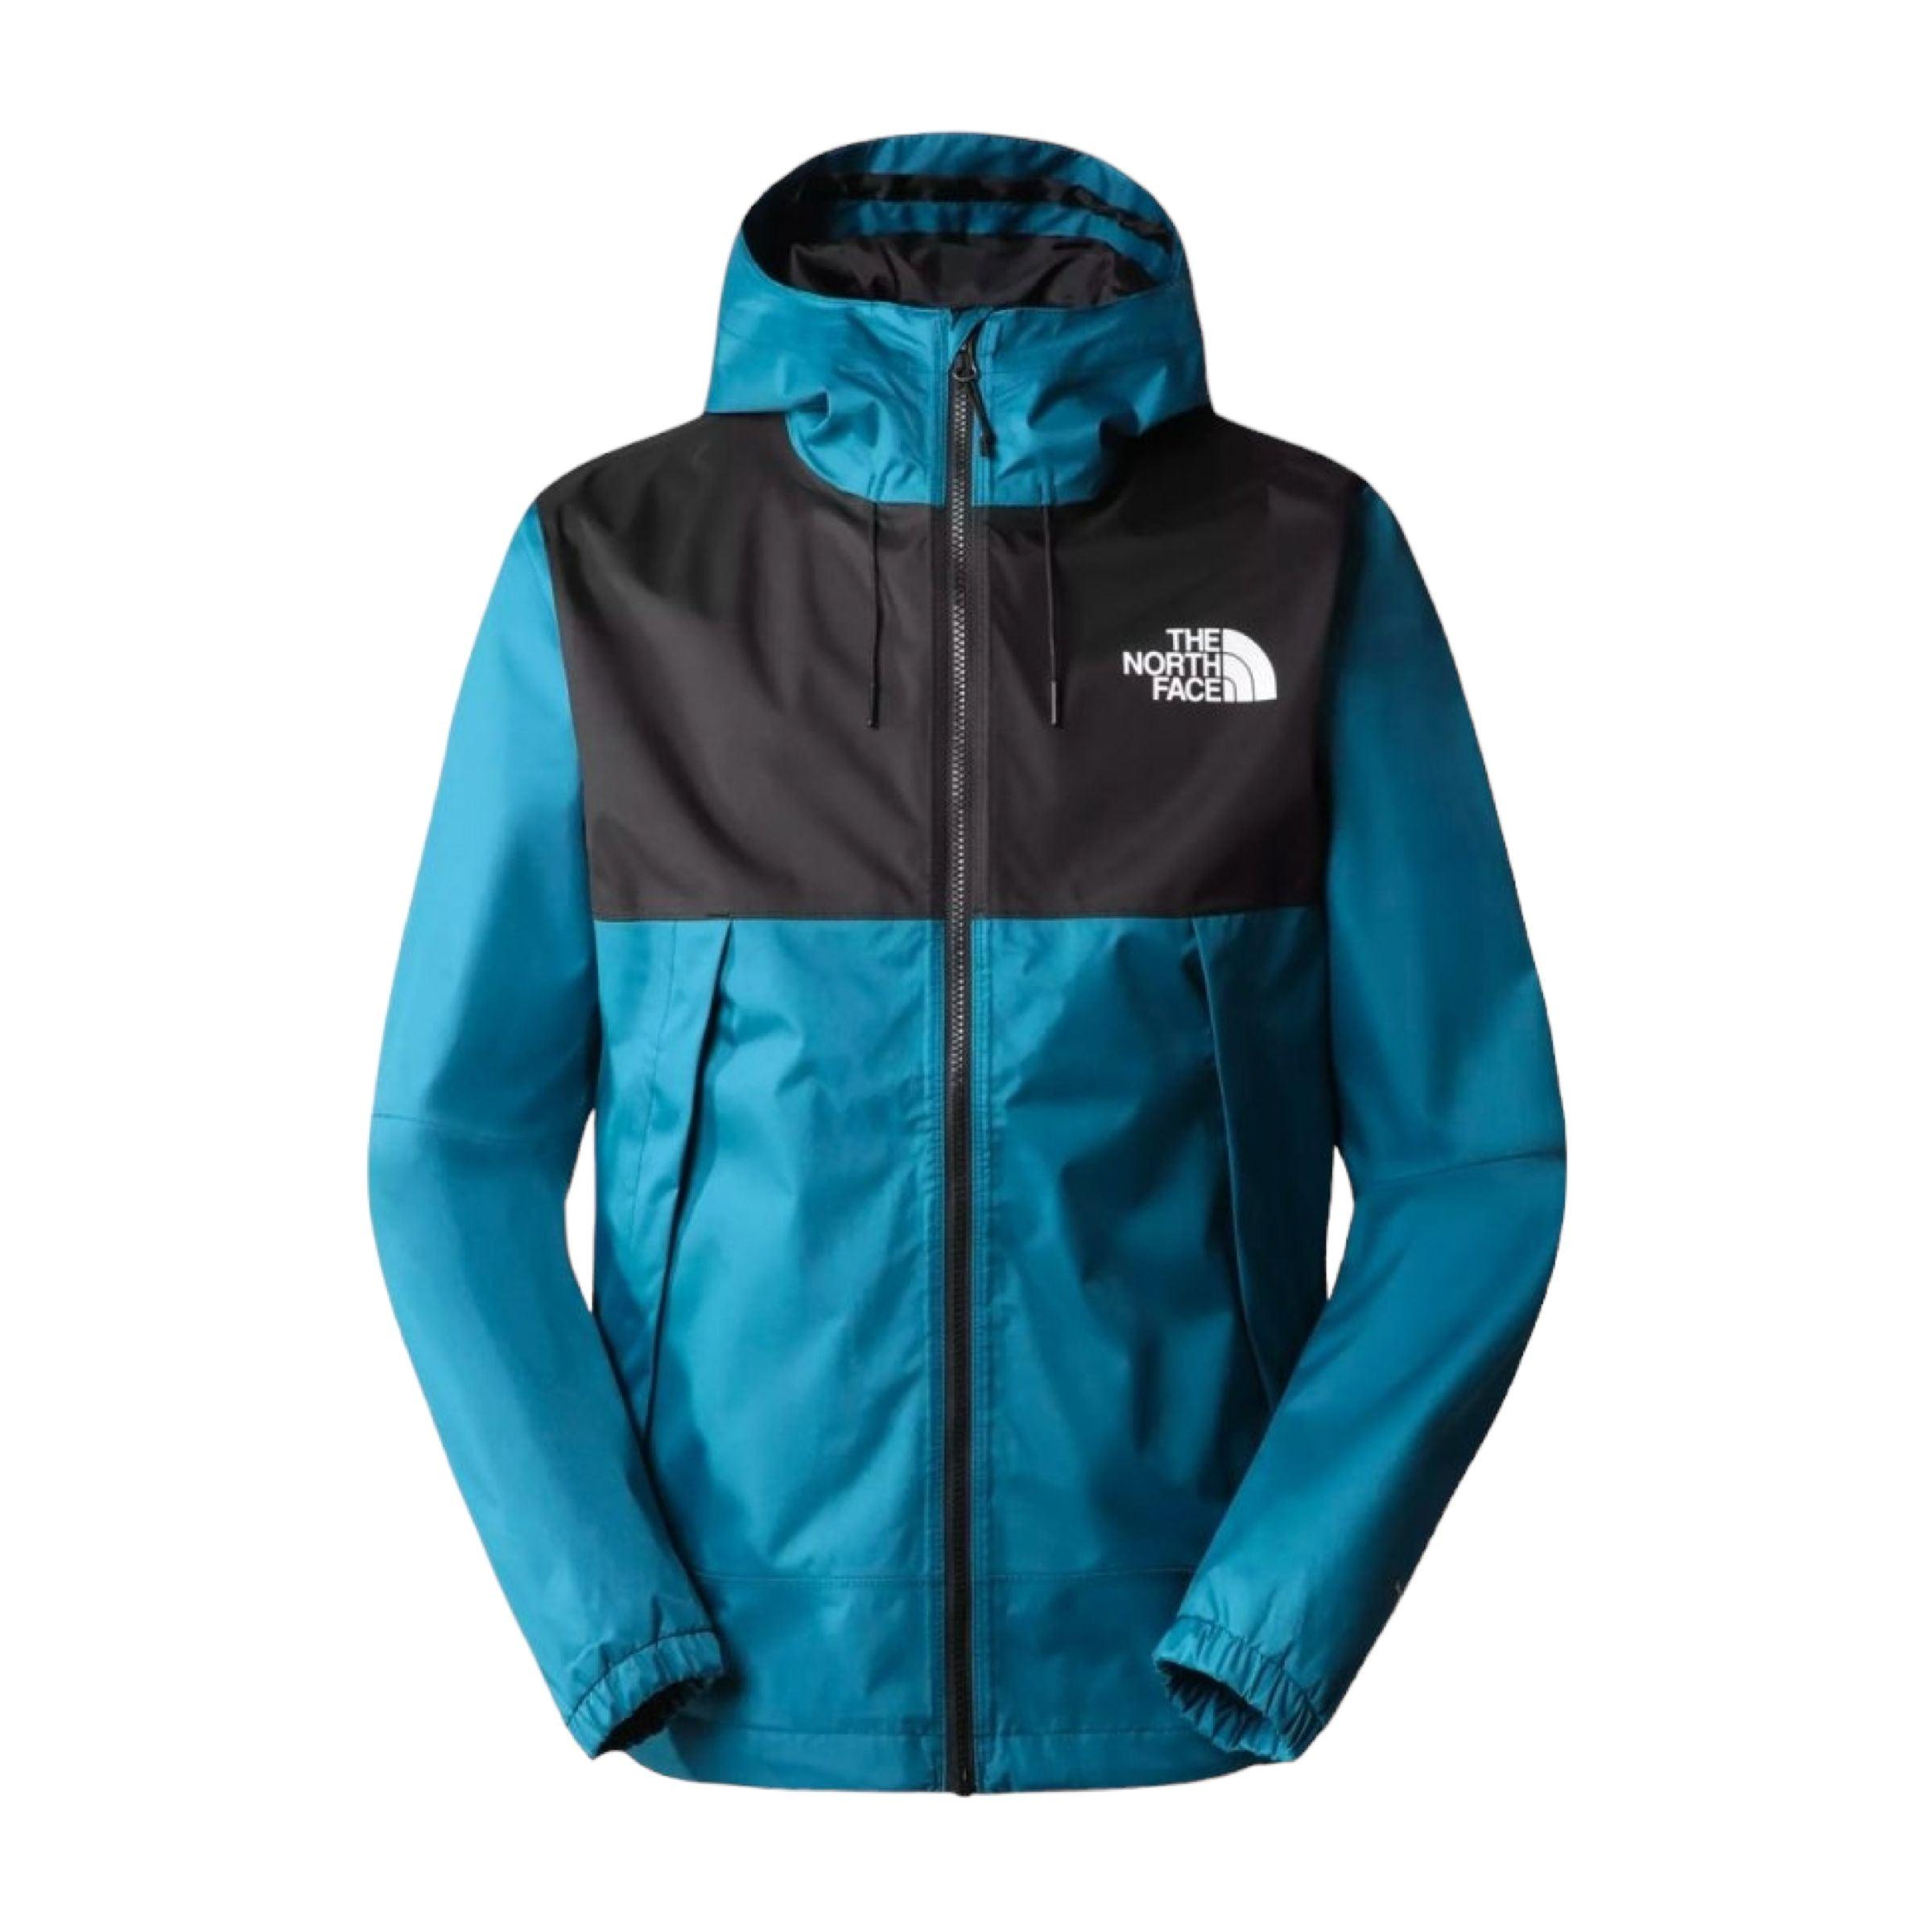 The North Face | Giacca New Mountain Q Uomo Blue Coral - Fabbrica Ski Sises